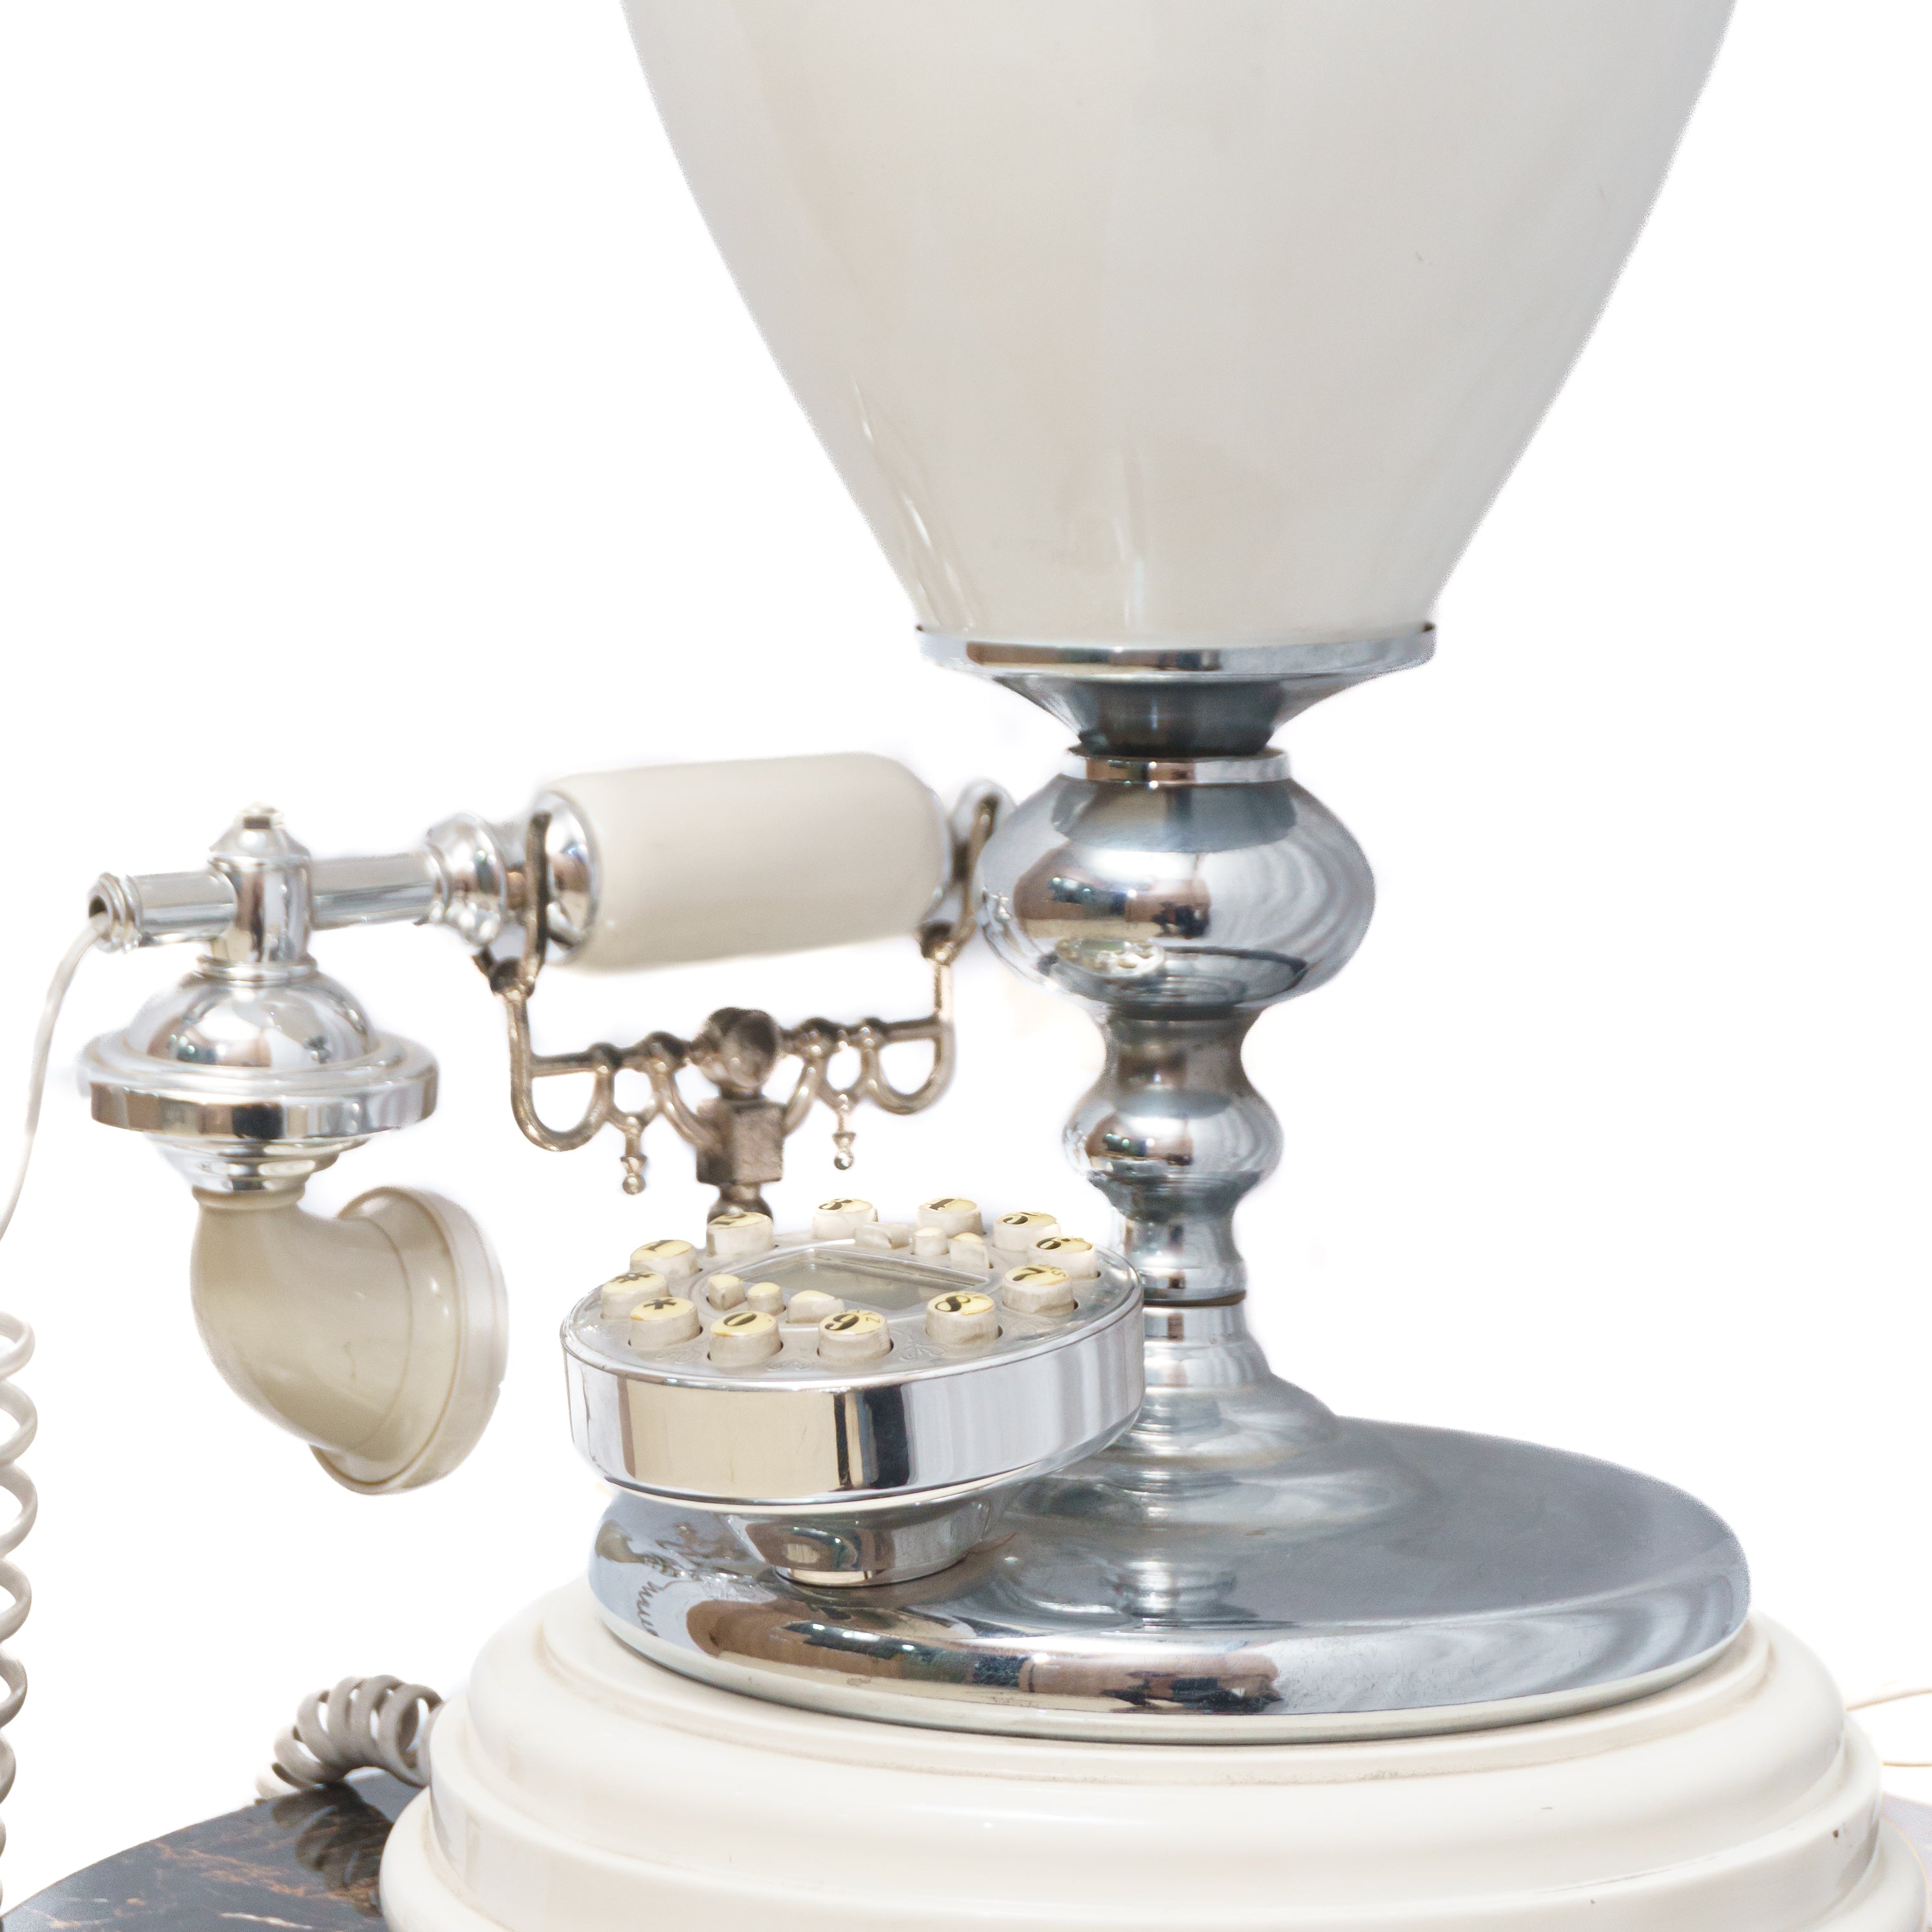 Clarity Shaped Electric Table Lamp: White Shade with Golden and White Pearls, Round Button Keypad Telephone Set Stand